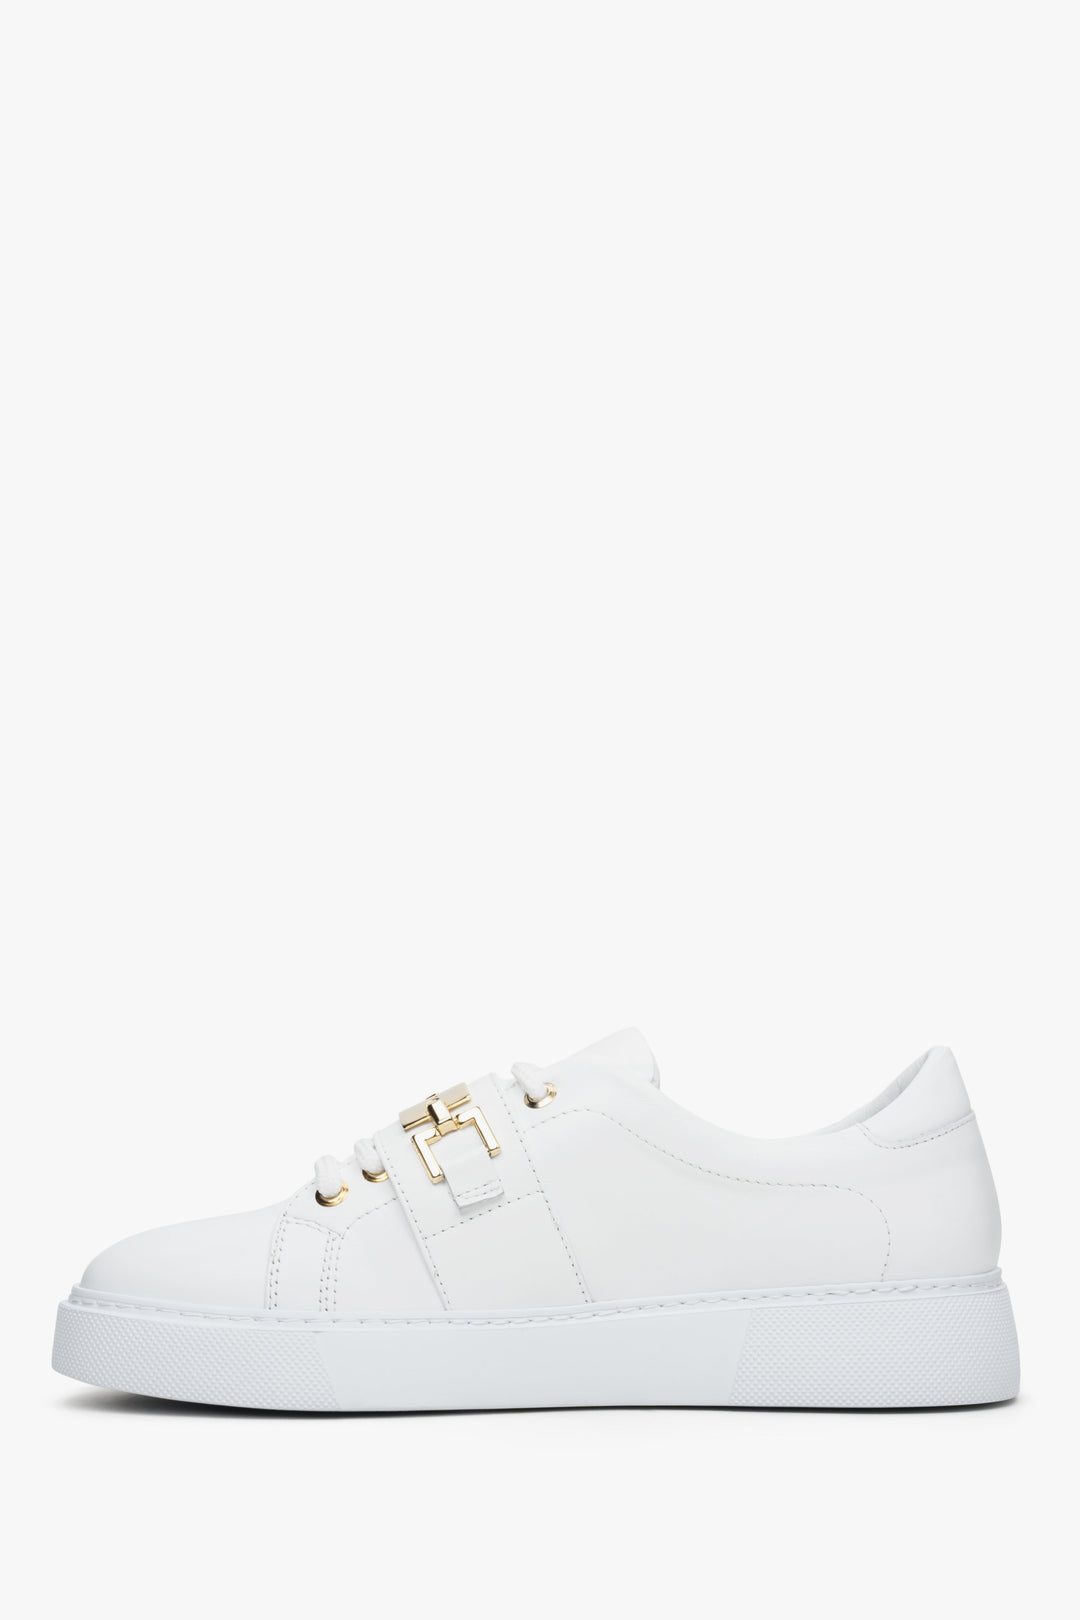 Women's white sneakers with a gold application by Estro - shoe profile.